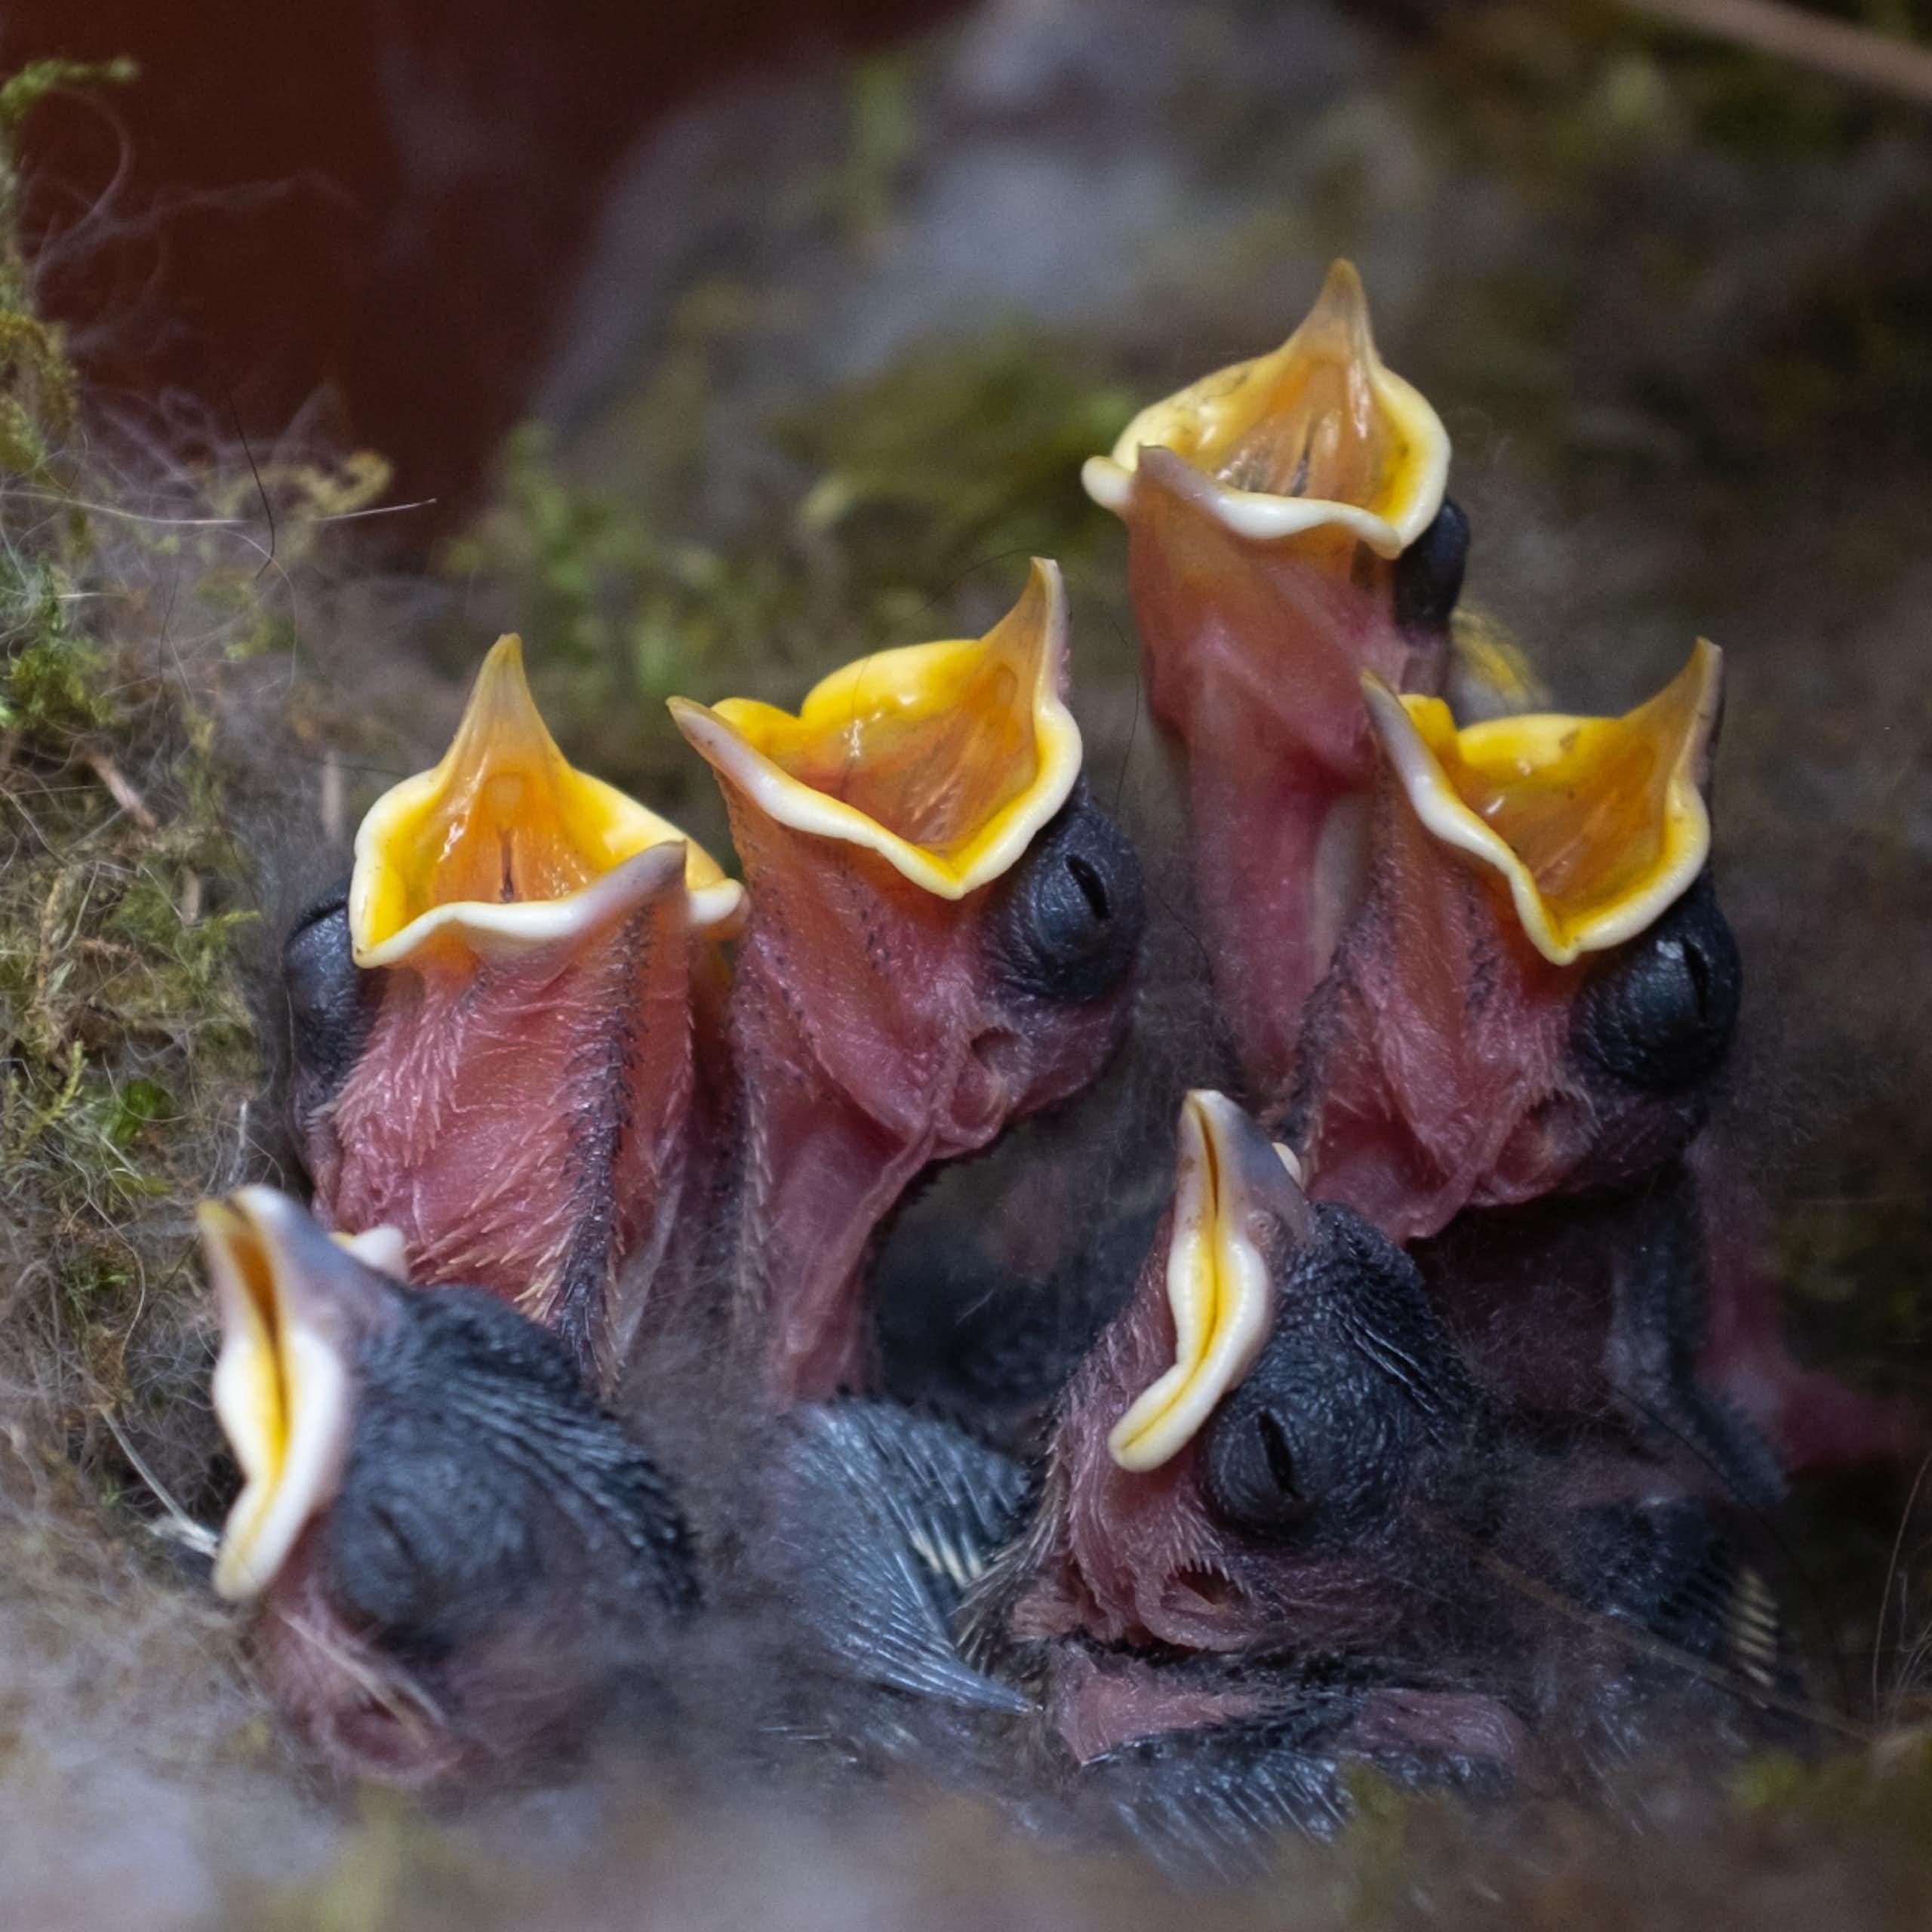 six tiny black chicks with yellow beaks in nest, four open beaks asking for food, surrounded by green moss